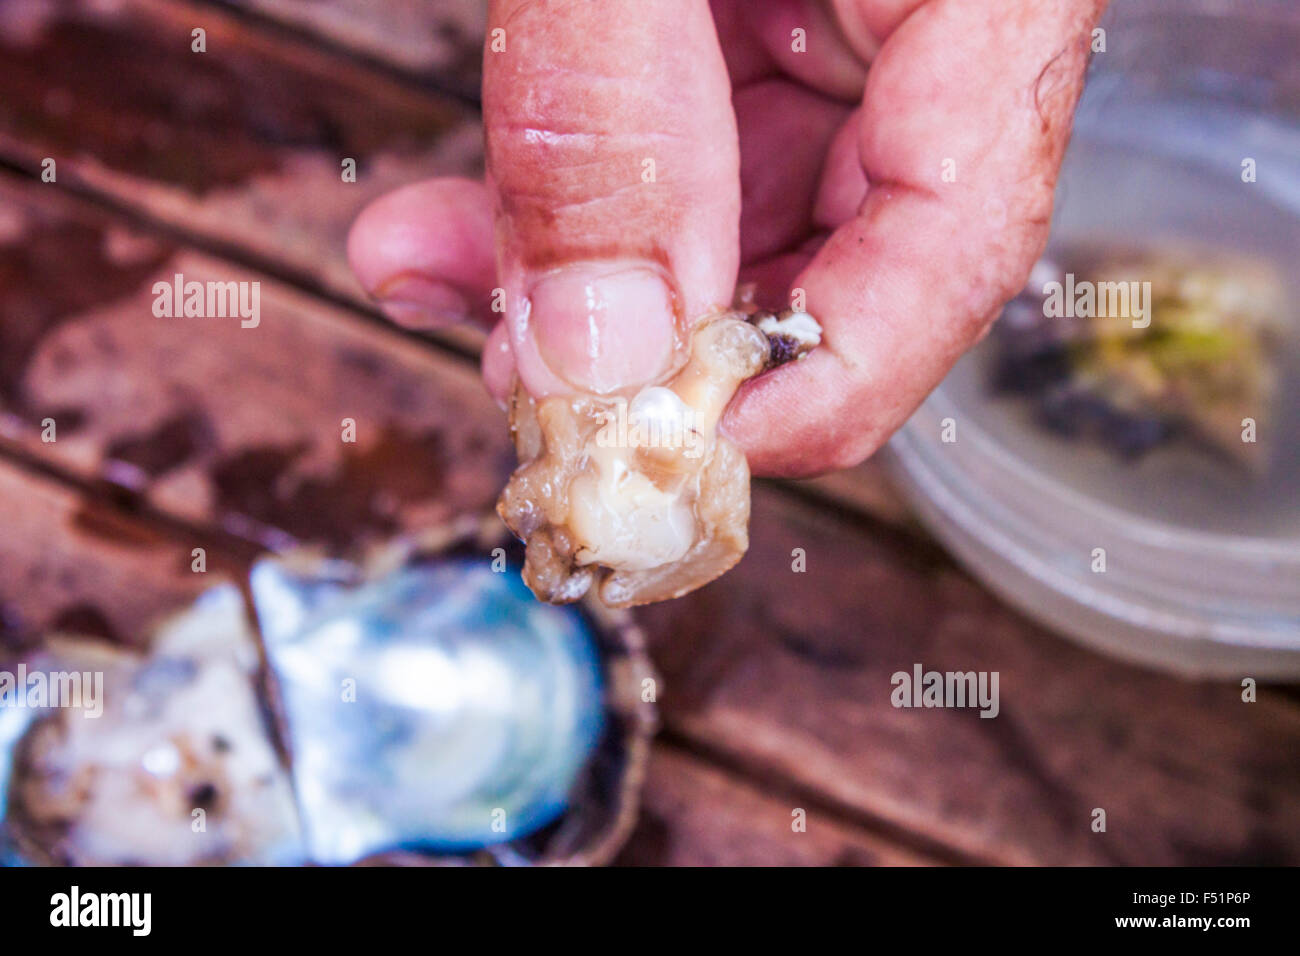 A fresh white Oyster pearl, in a mans hand Stock Photo